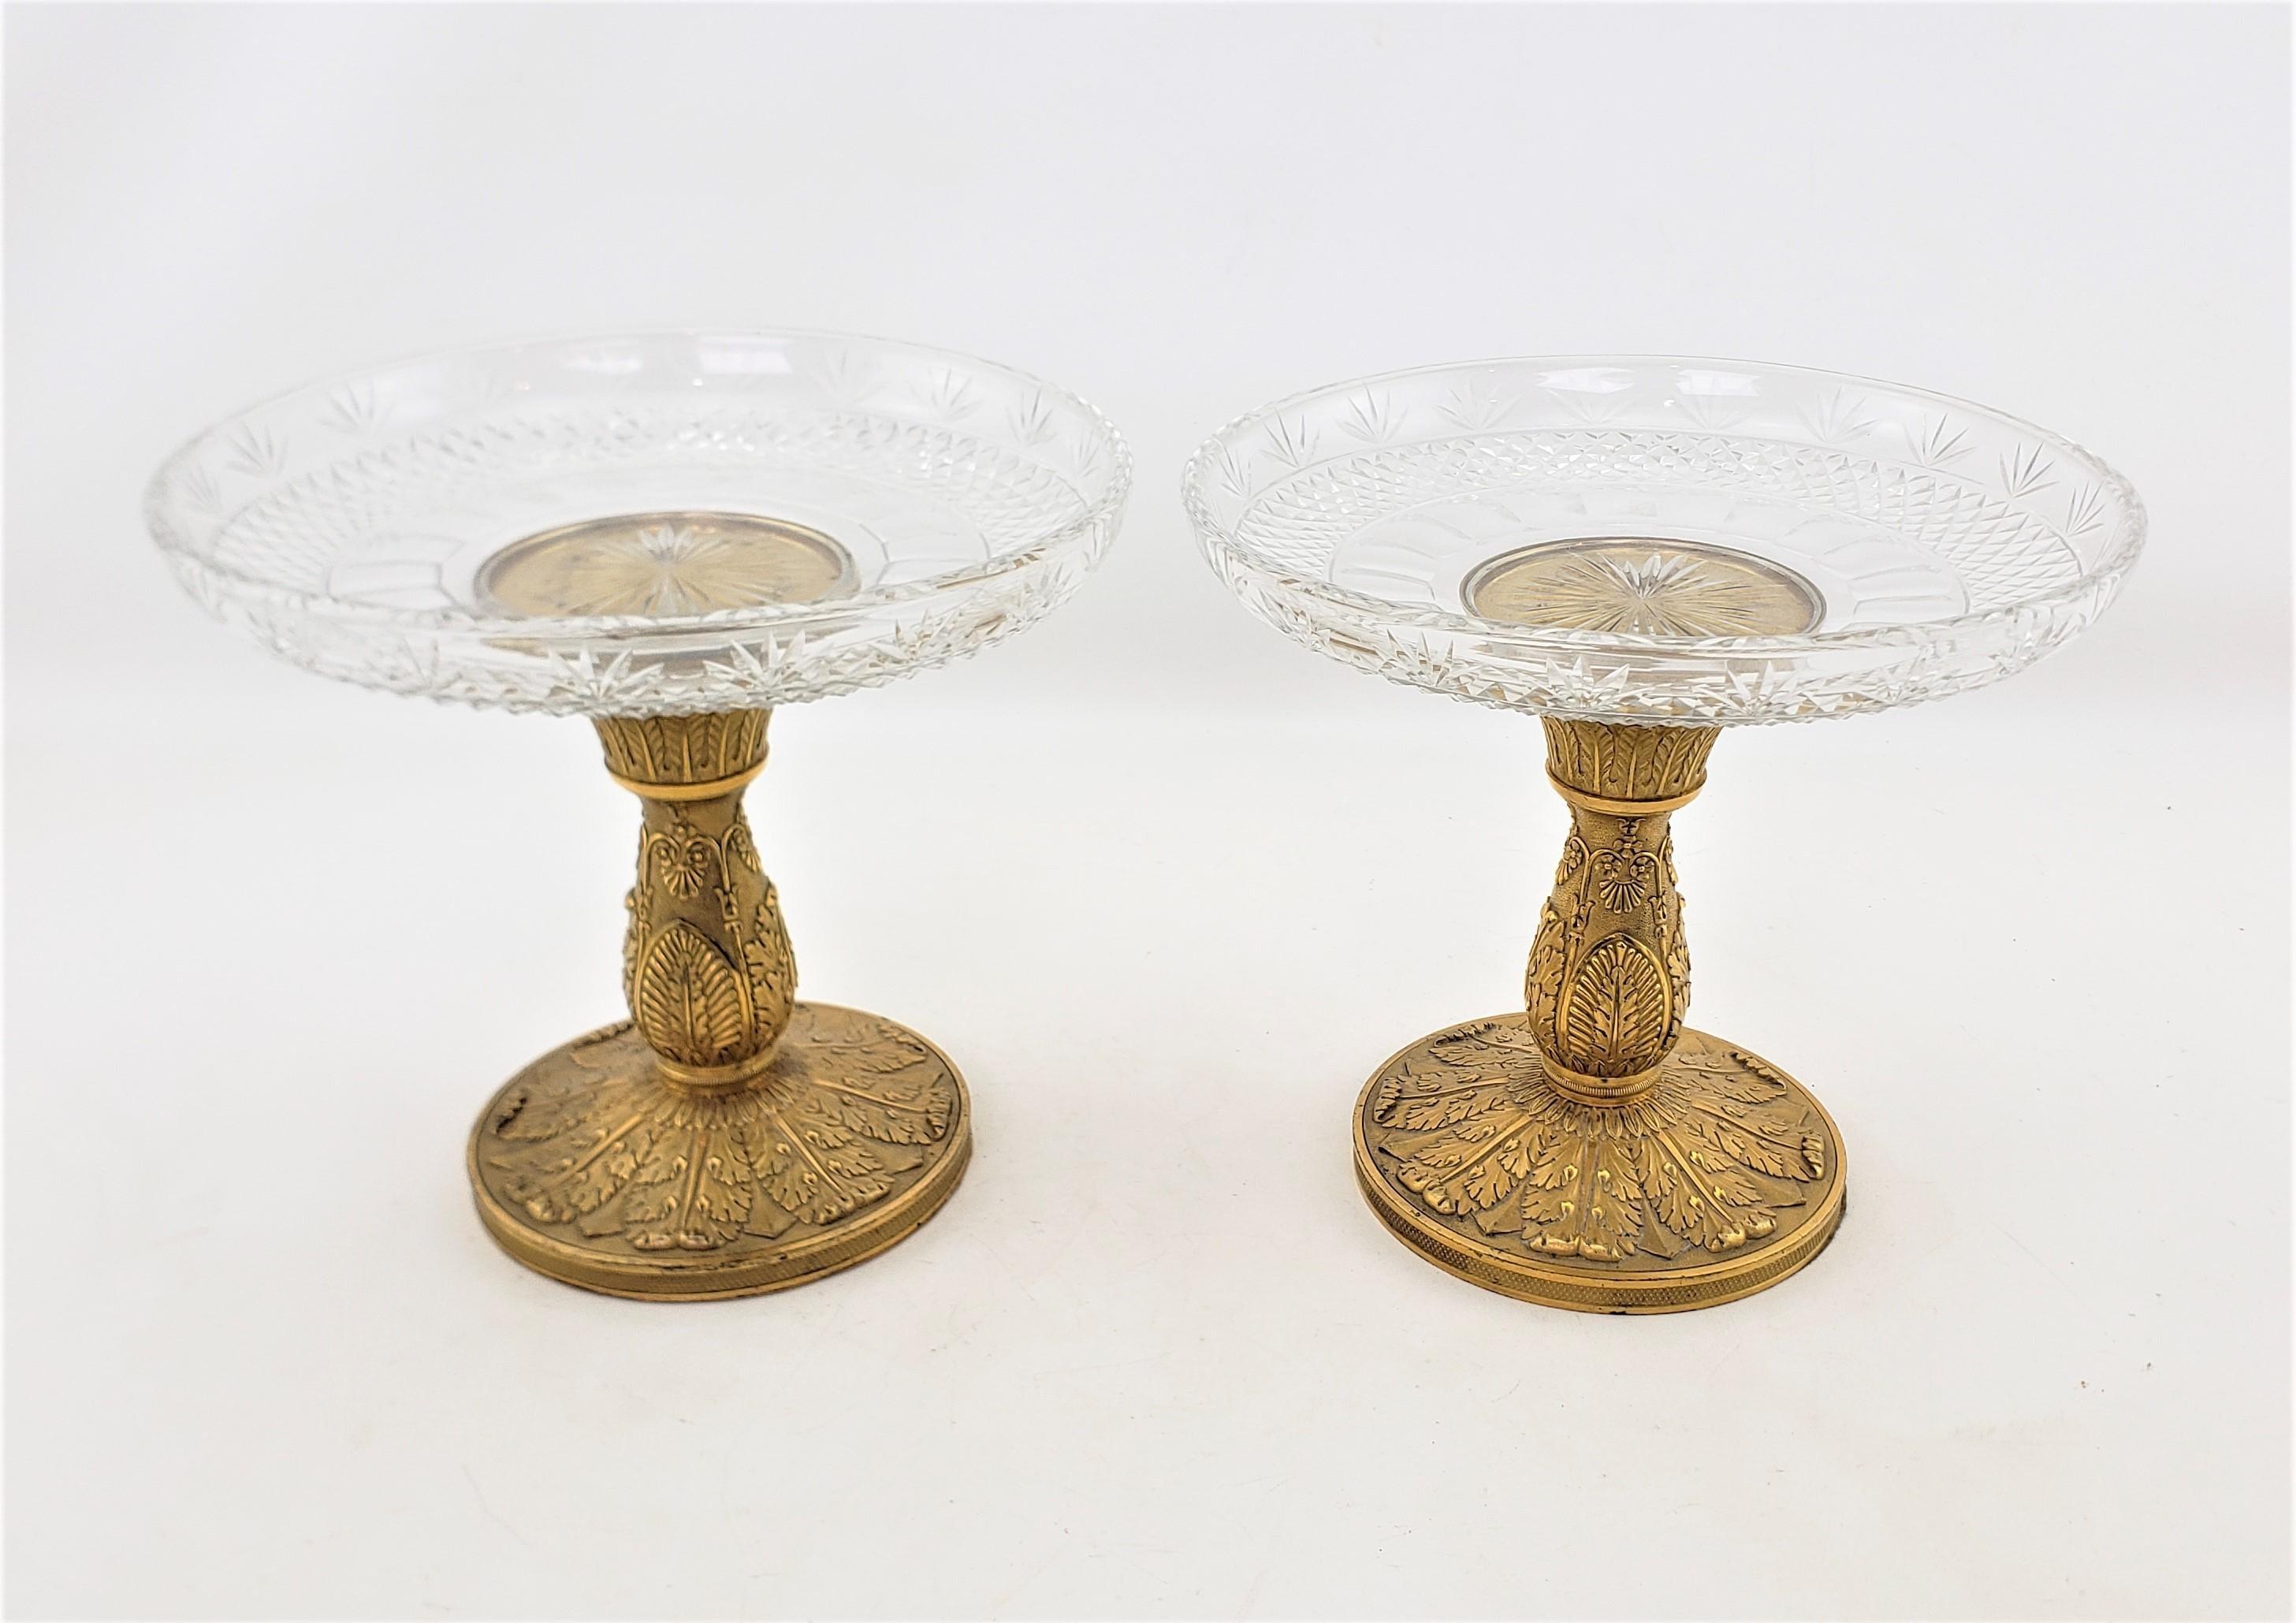 This pair of antique tazzas are unsigned, but presumed to have originated from France and date to approximately 1900 and done in a Neoclassical style. The tops are done in a clear cut crystal with a cross pattern and the bases are done in a cast